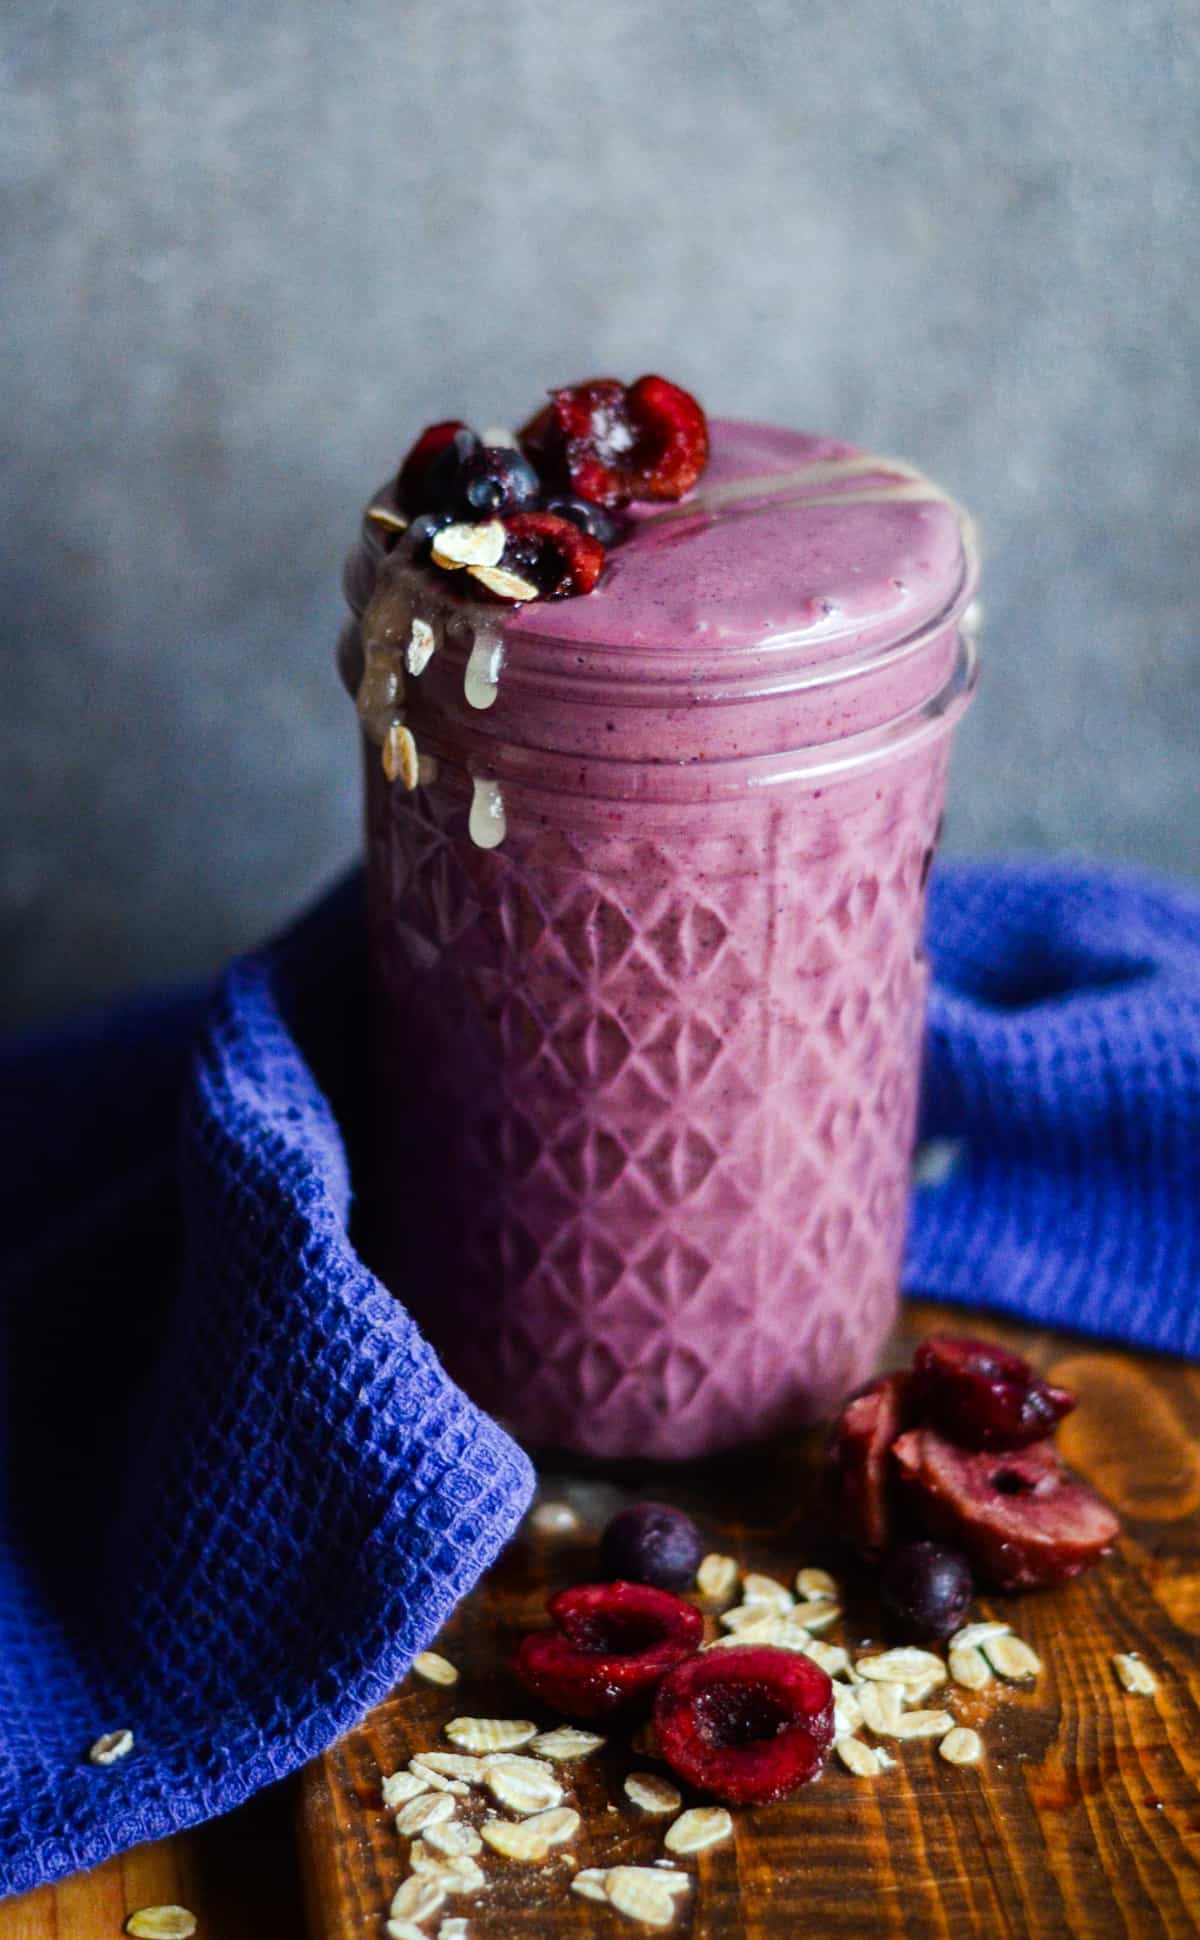 Purple smoothie with cherries in half, blueberries, rolled oats, and honey on top.